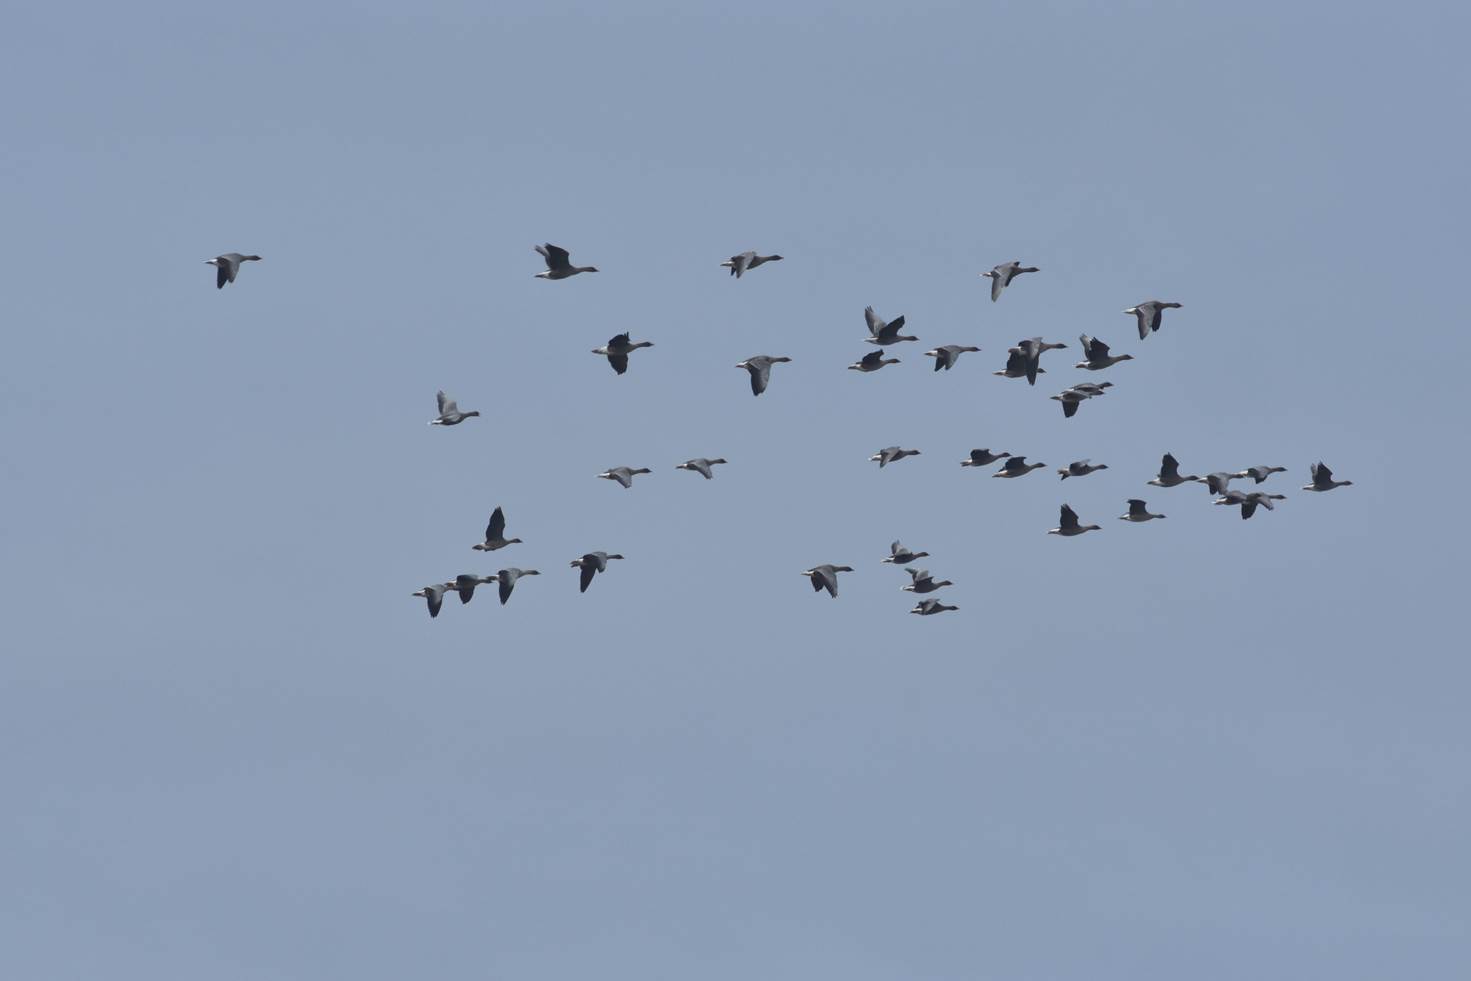 A flock of birds flying in the sky

Description automatically generated